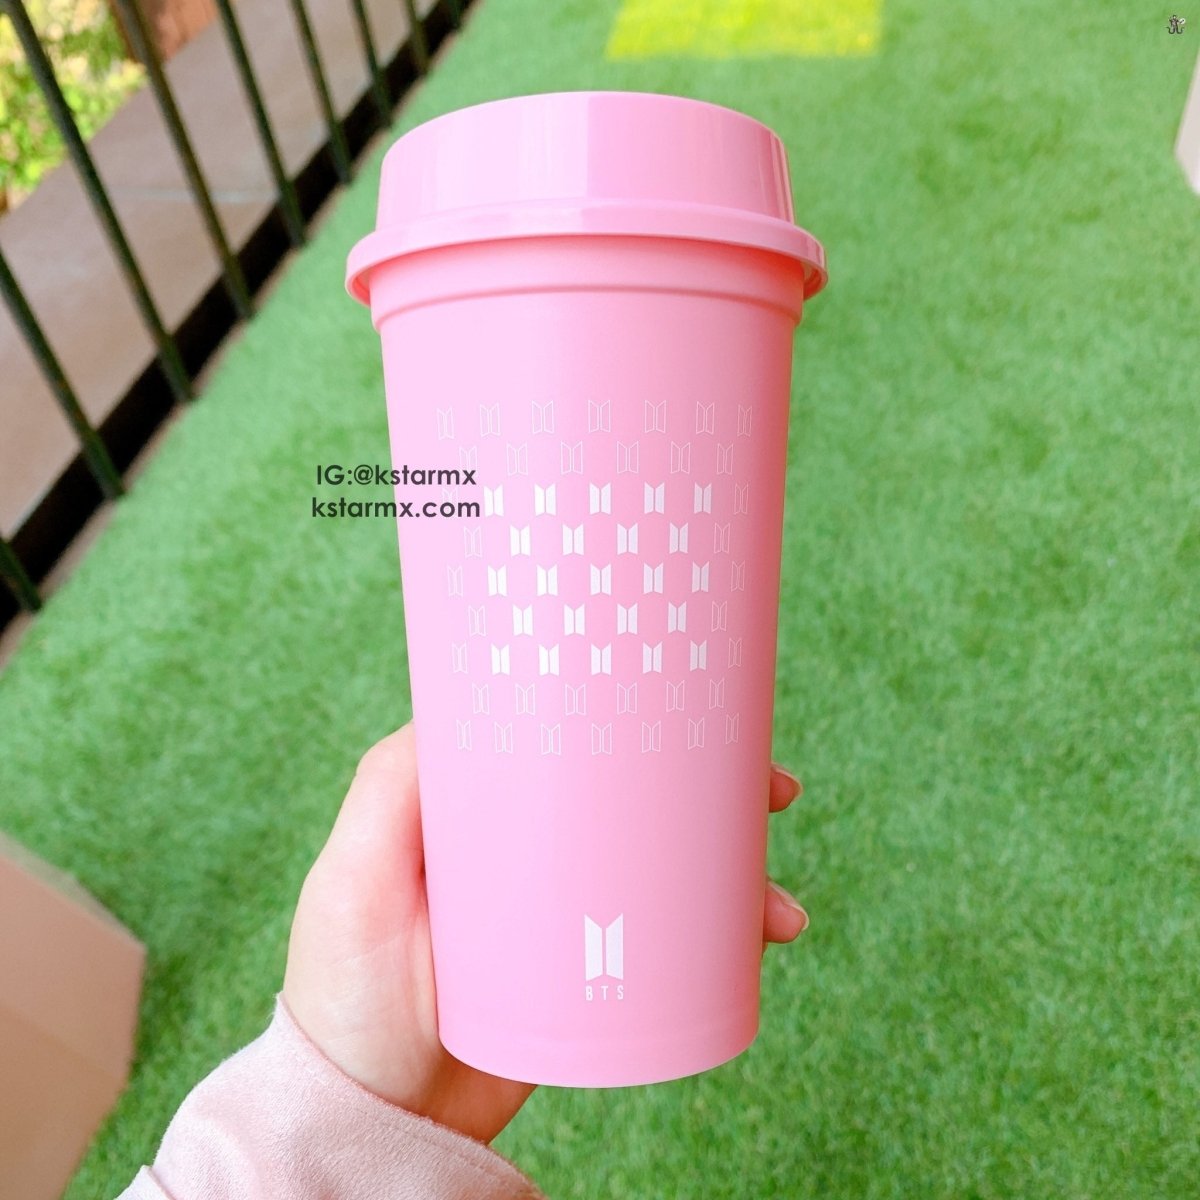 BIG HIT] OFFICIAL HOUSE OF BTS SEOUL MD – REUSABLE CUP – K-STAR